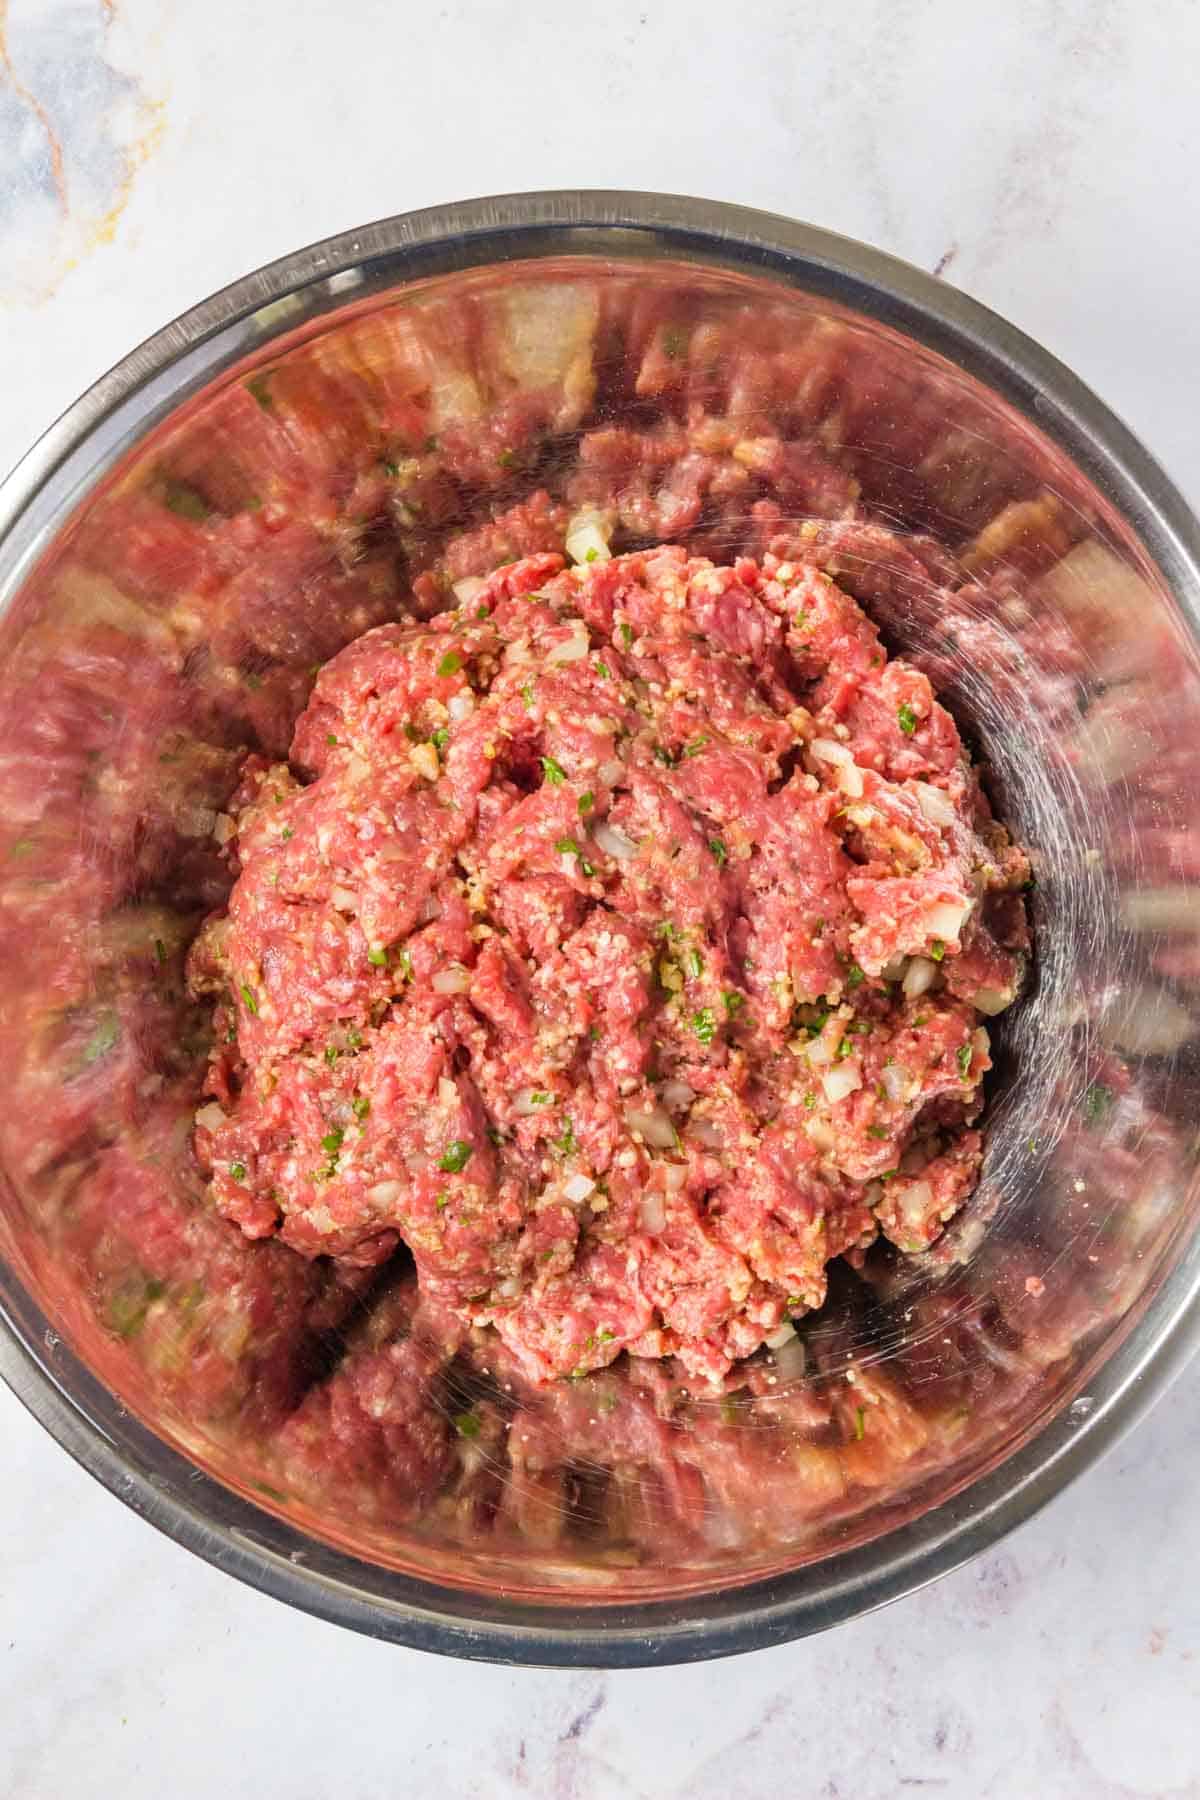 The prepared beef mixture inside of a large metal mixing bowl on a countertop